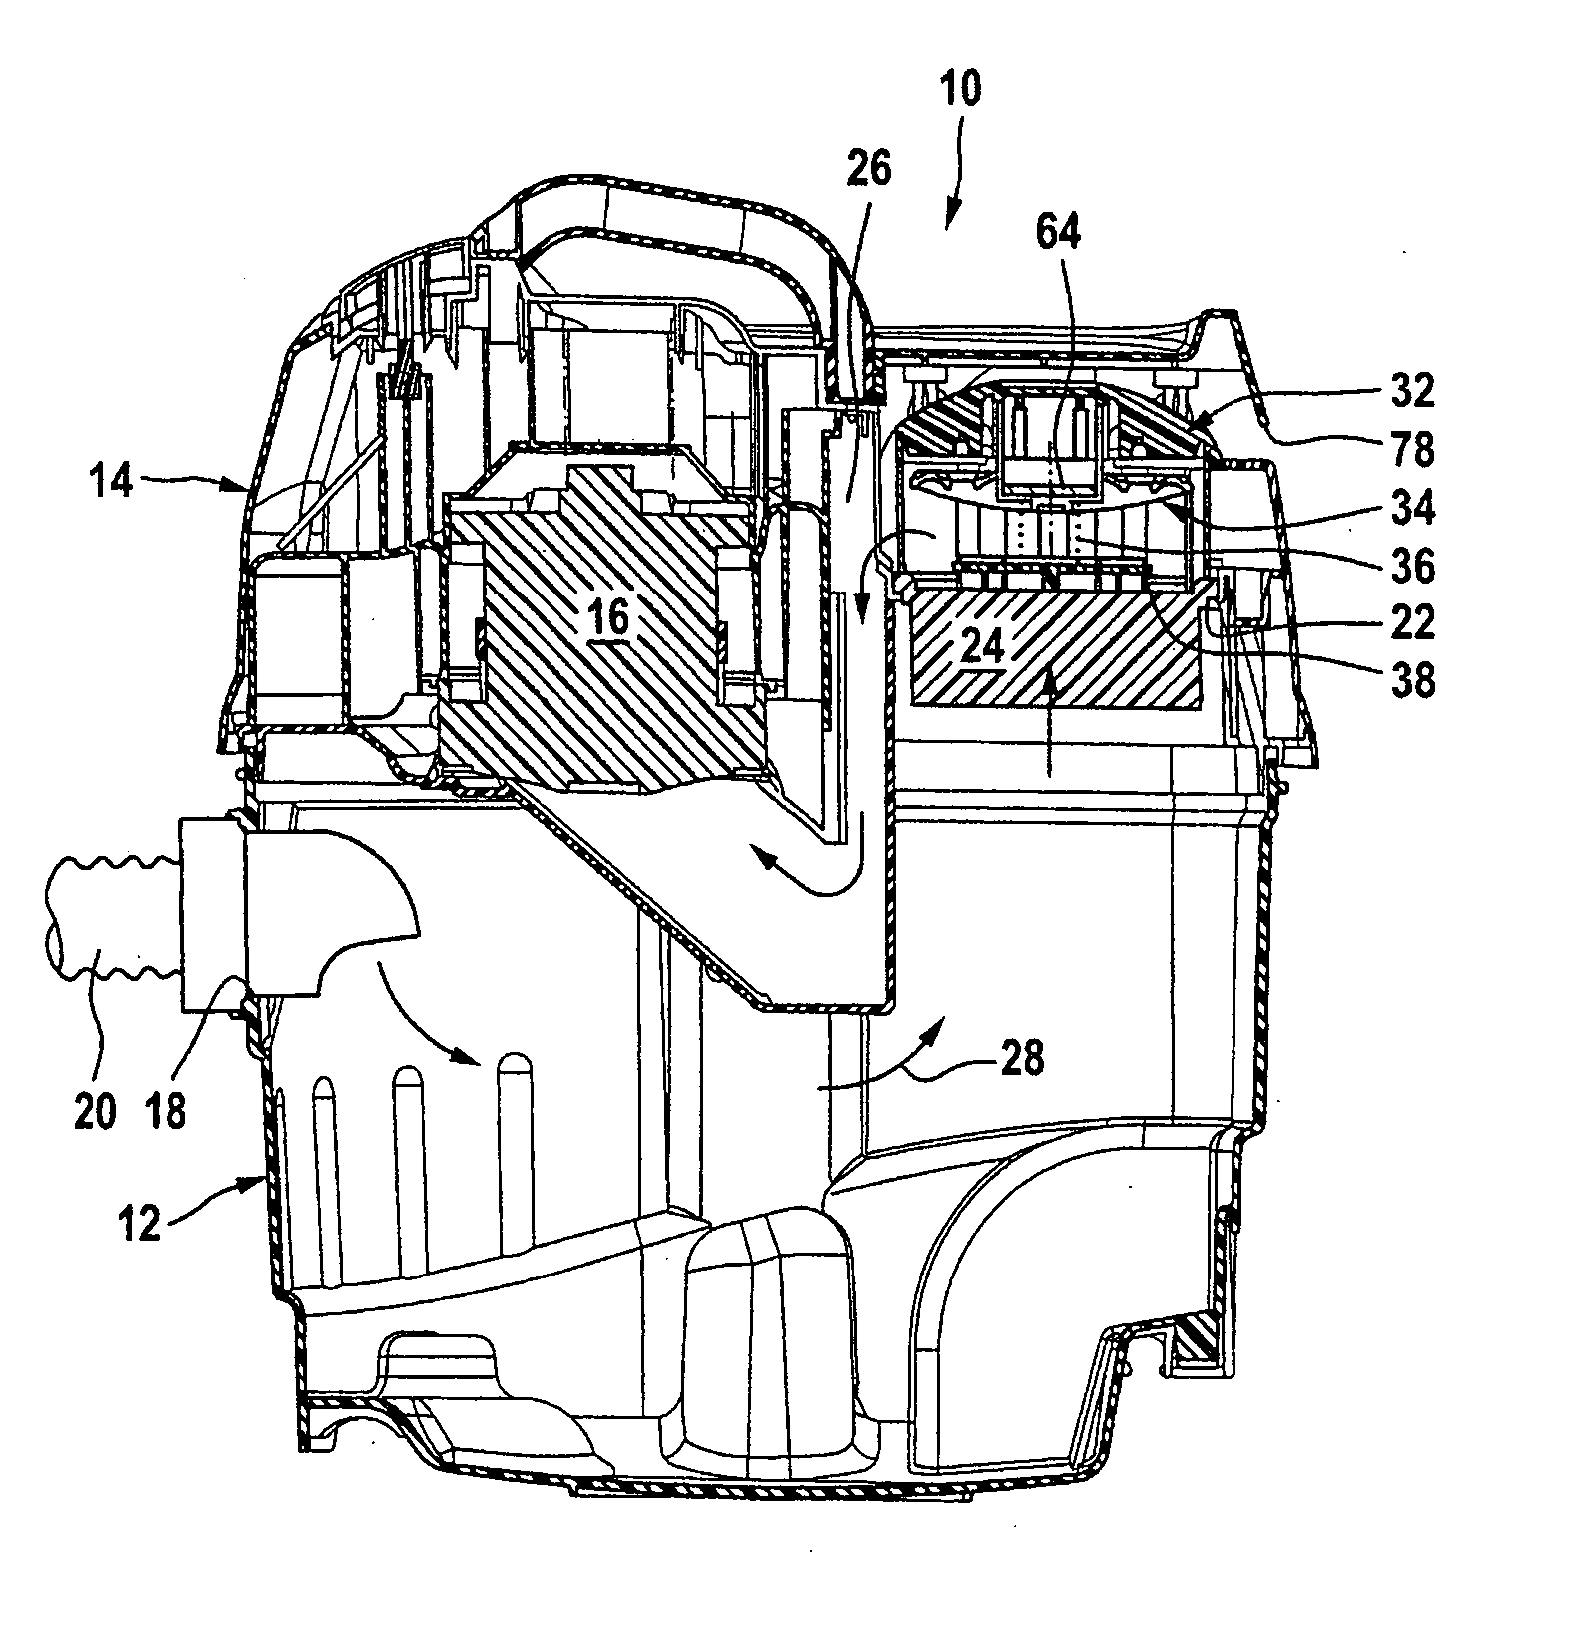 Method for cleaning the filters of a vacuum Cleaner and vacuum cleaner for carrying out said method